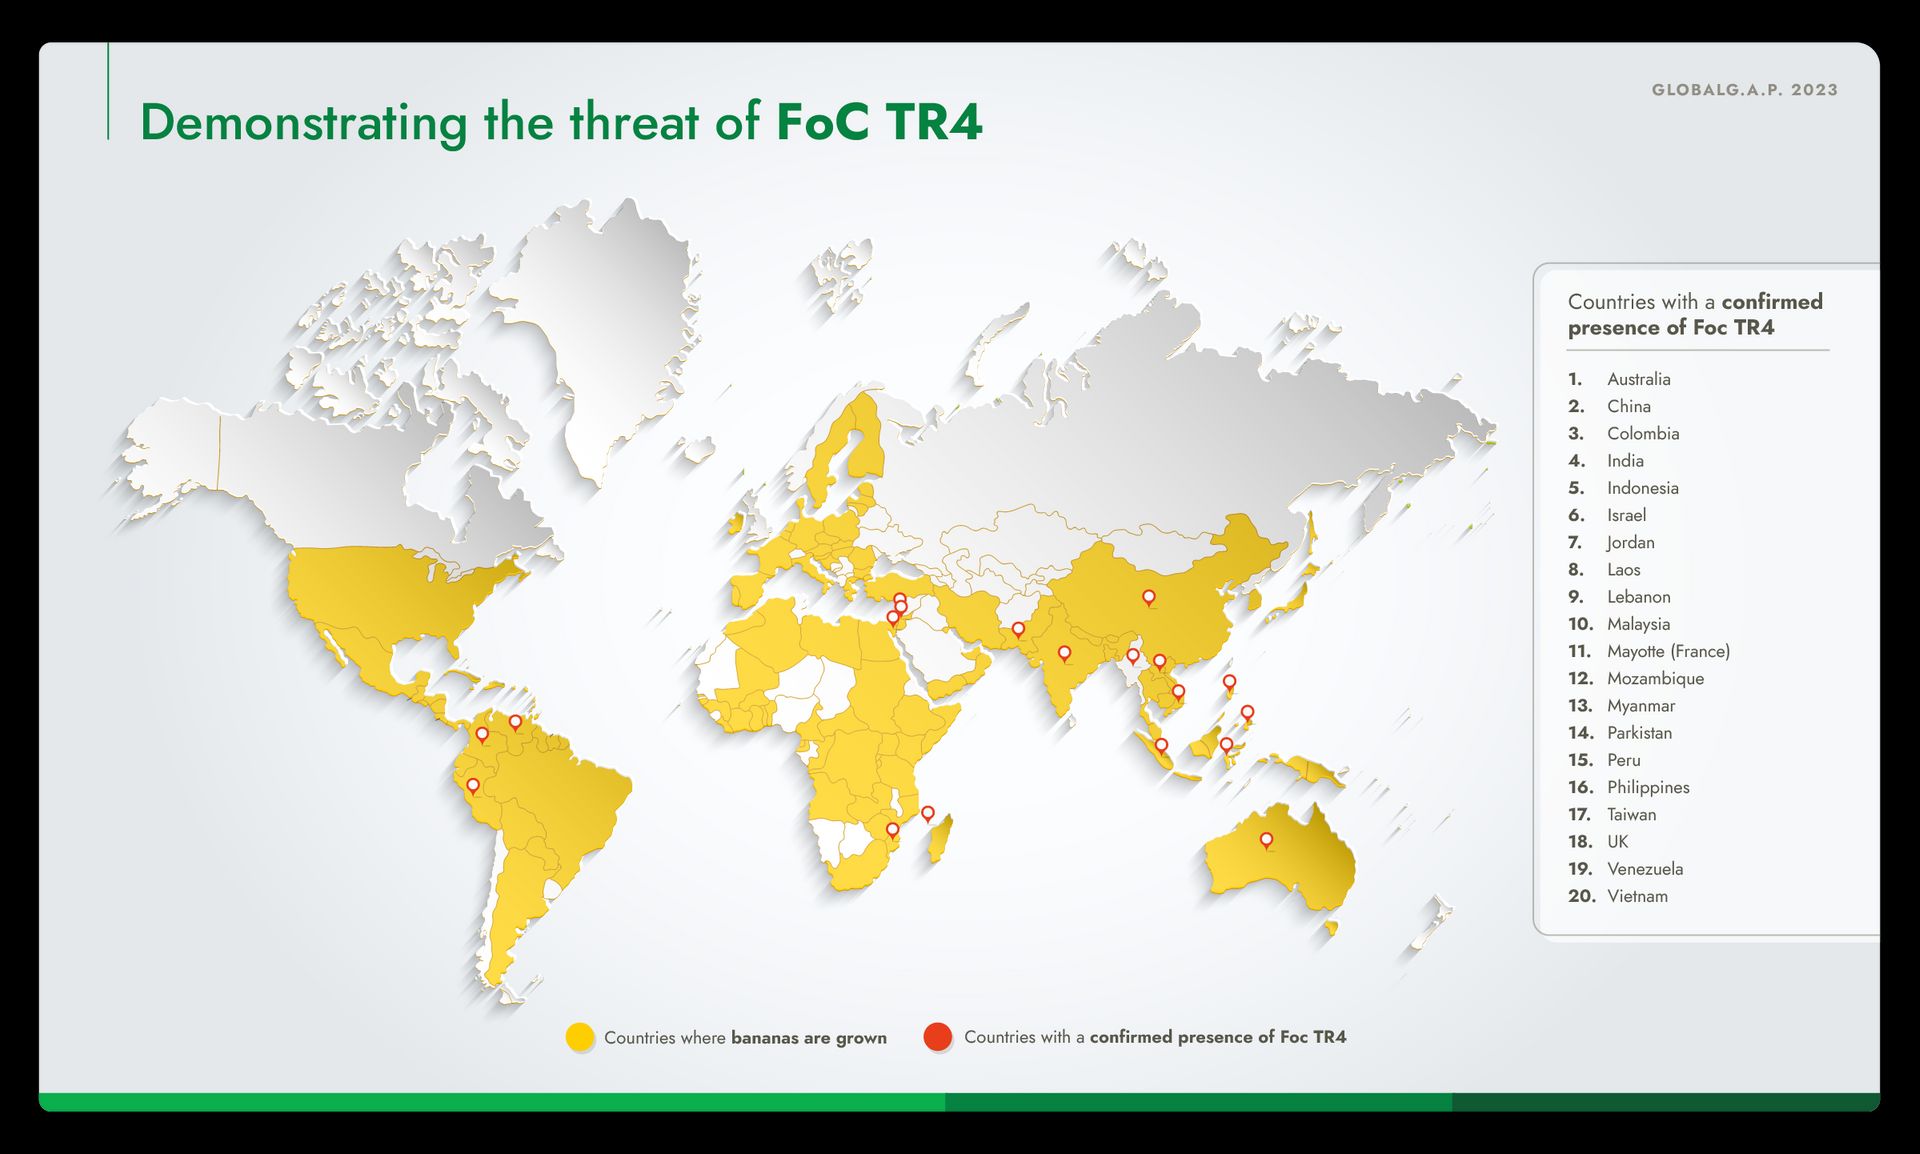 Infographic of a world map identifying countries with a confirmed presence of Foc TR4 